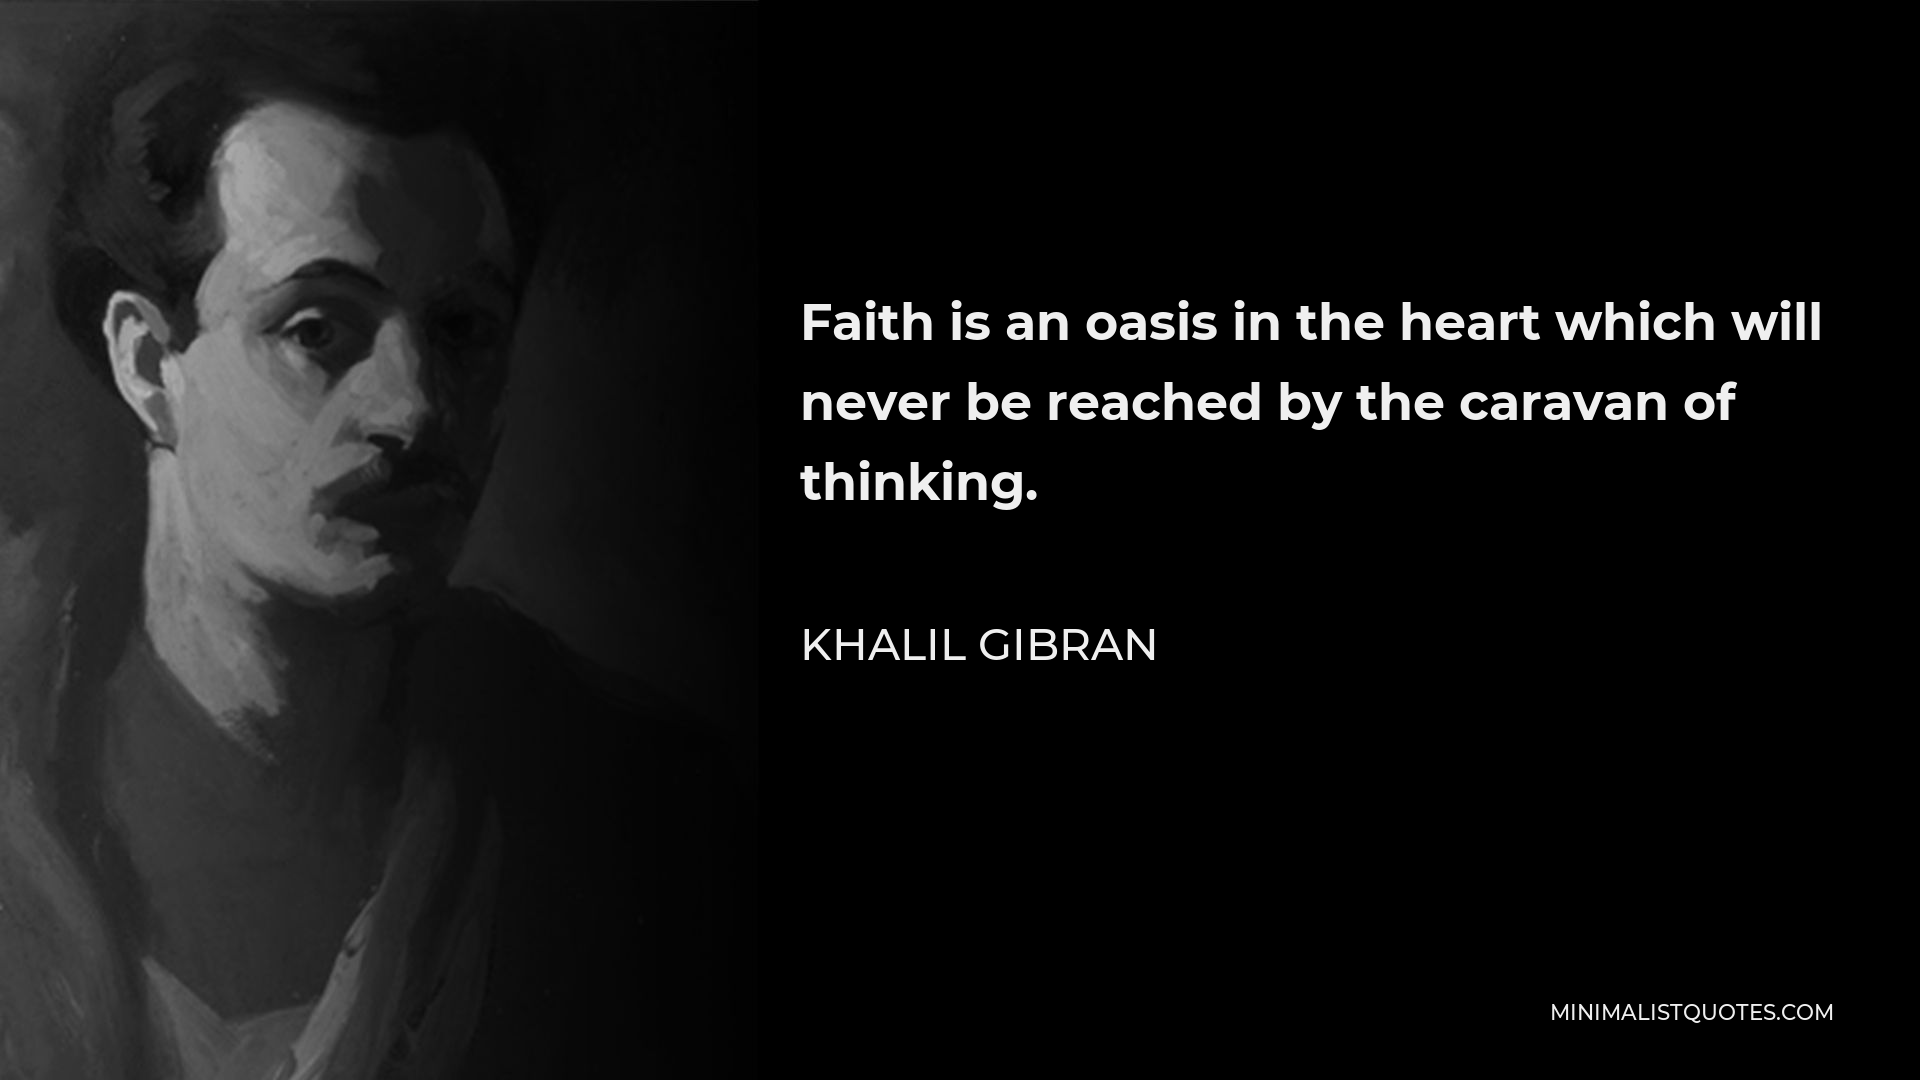 Khalil Gibran Quote - Faith is an oasis in the heart which will never be reached by the caravan of thinking.